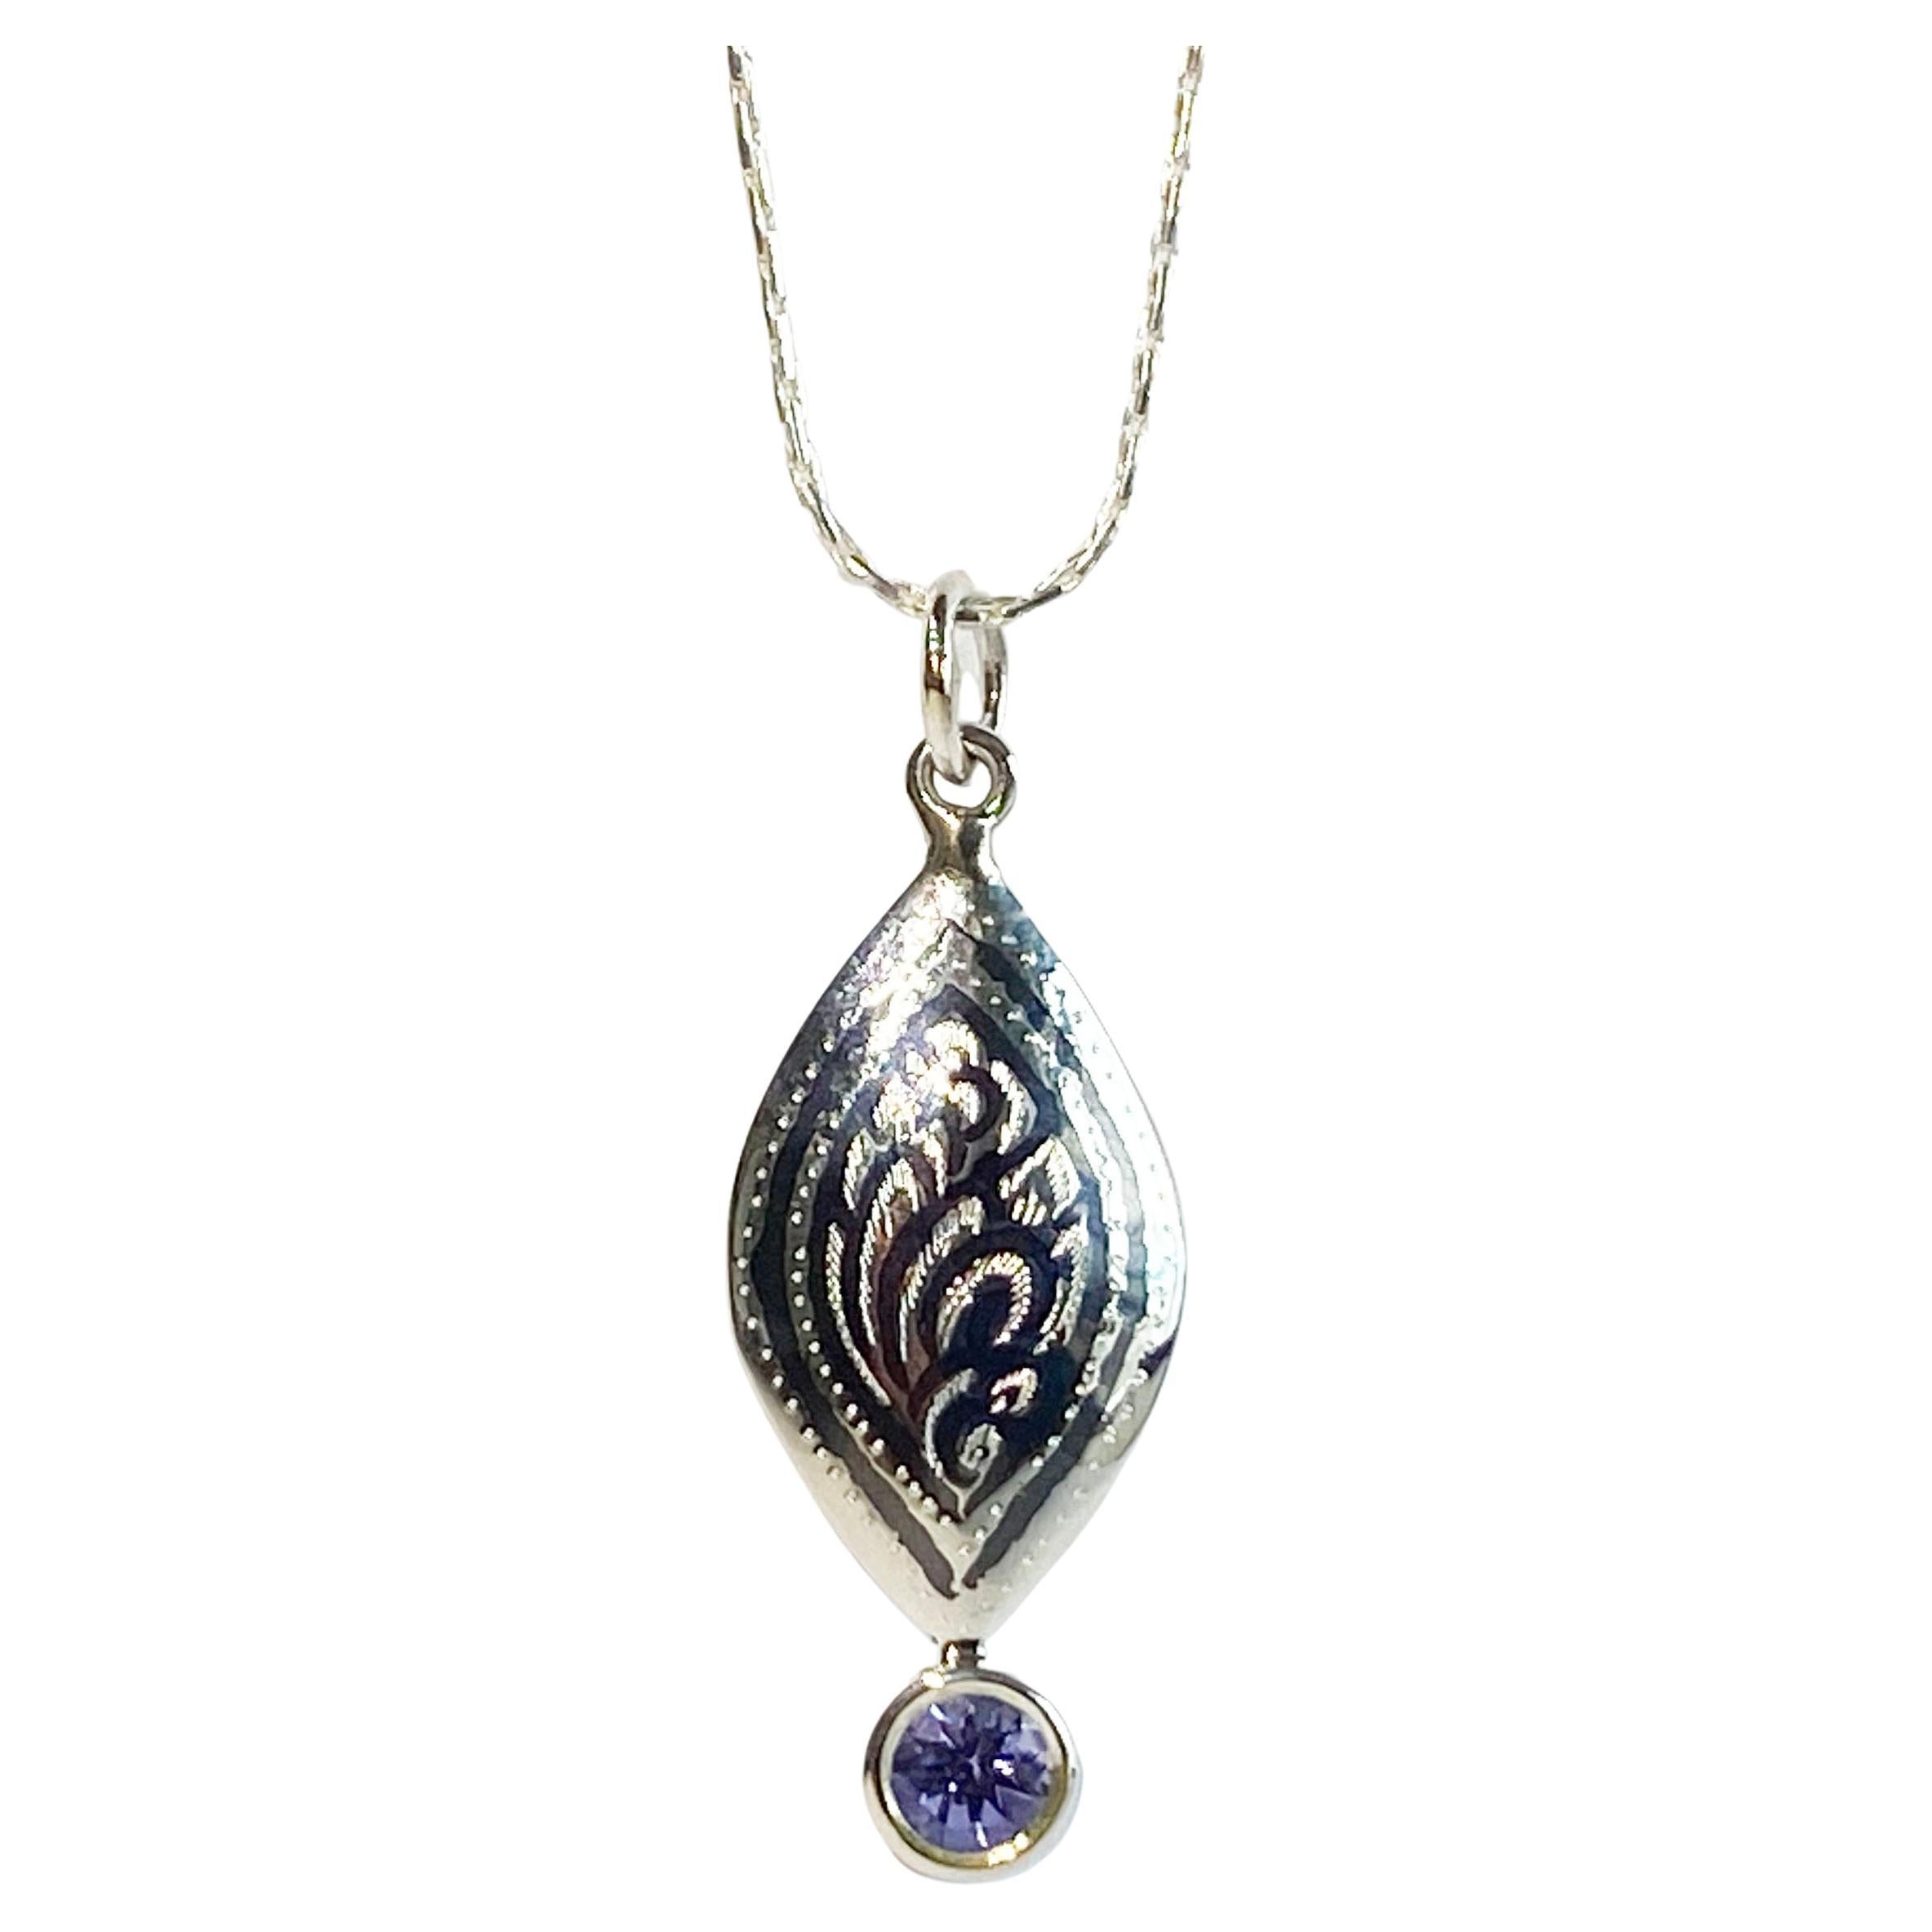 A Silver Filagree Pendant set with a 5MM Round Tanzanite 